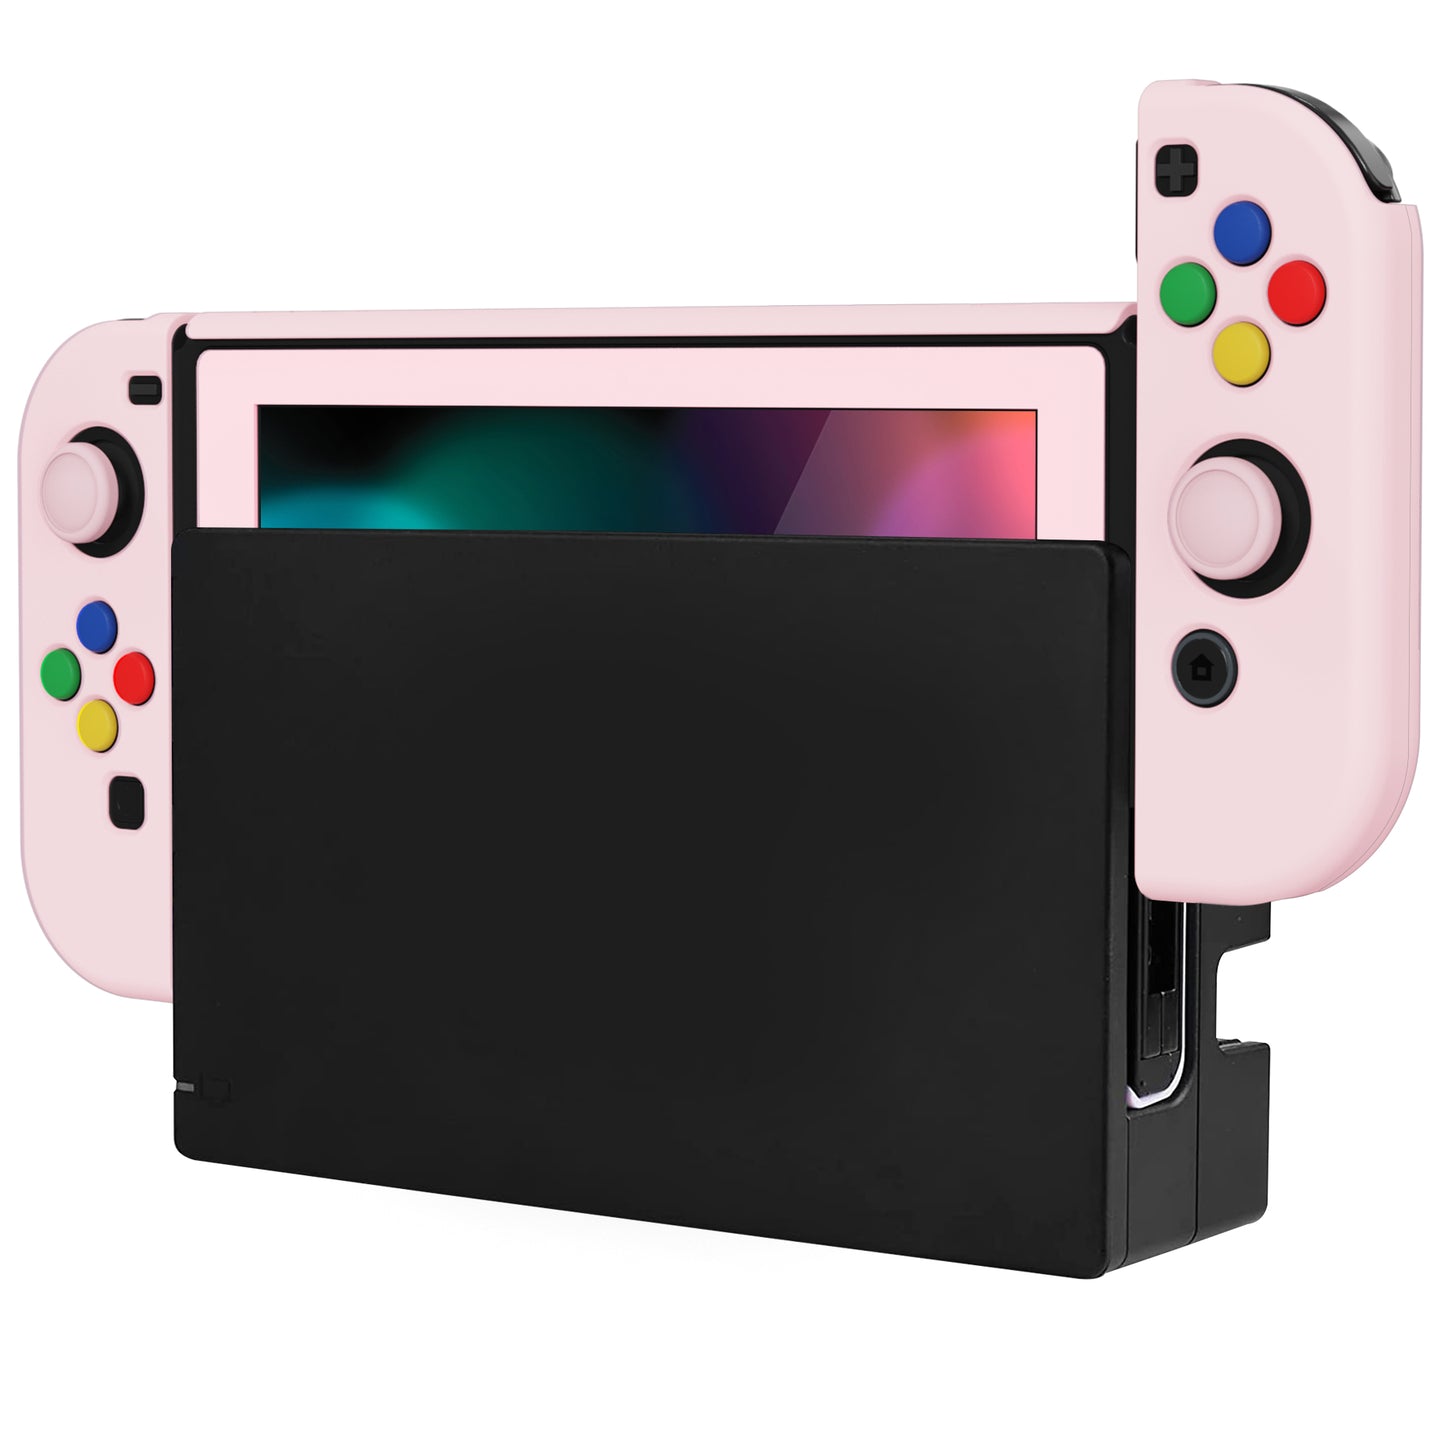 PlayVital AlterGrips Dockable Protective Case Ergonomic Grip Cover for Nintendo Switch, Interchangeable Joycon Cover w/Screen Protector & Thumb Grip Caps & Button Caps - Cherry Blossoms Pink - TNSYP3007 playvital